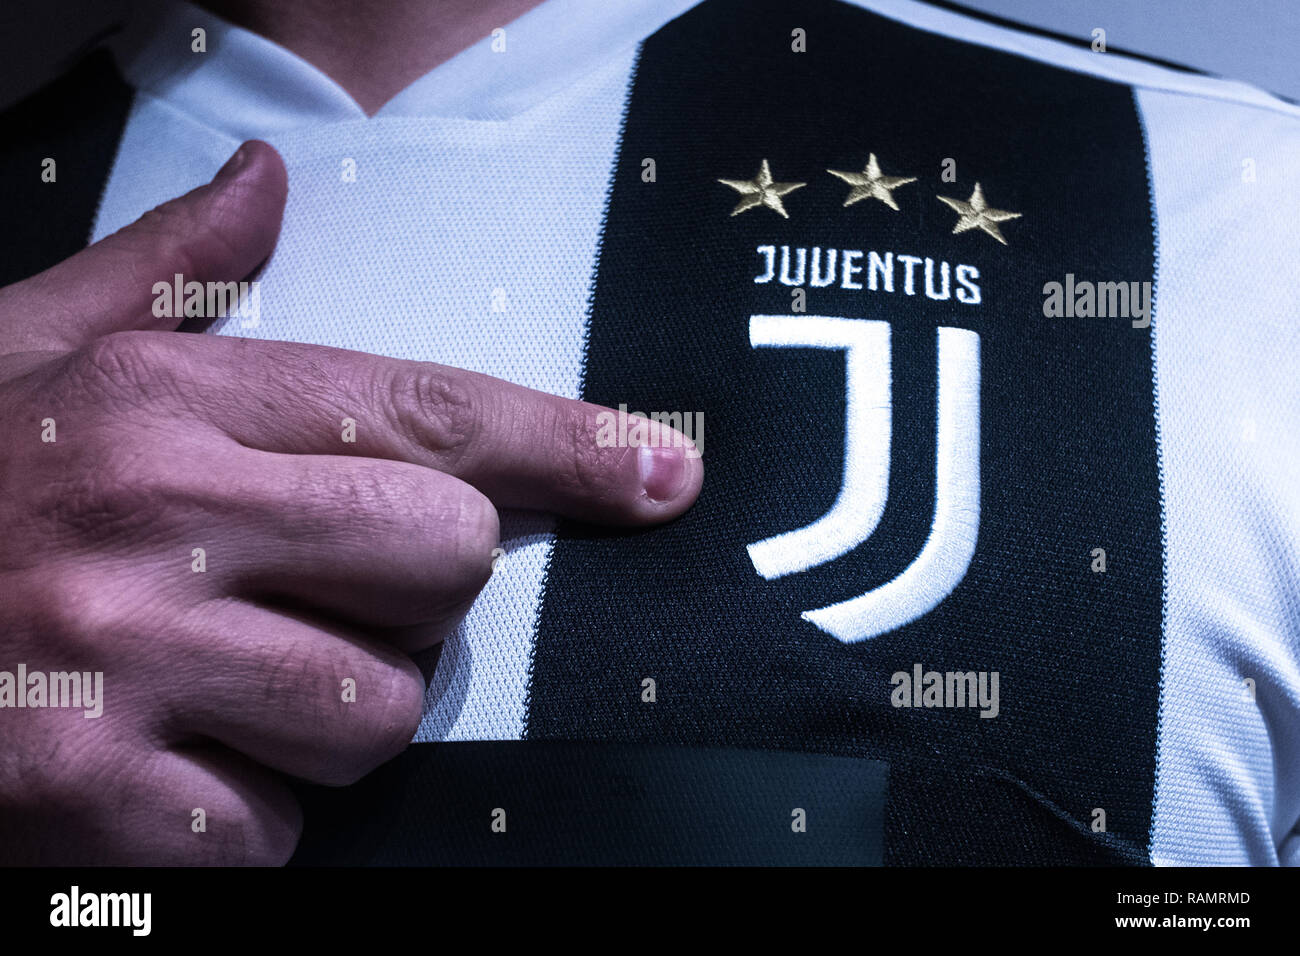 Italy 3rd January 2019 The New Juventus Logo Is Shown On